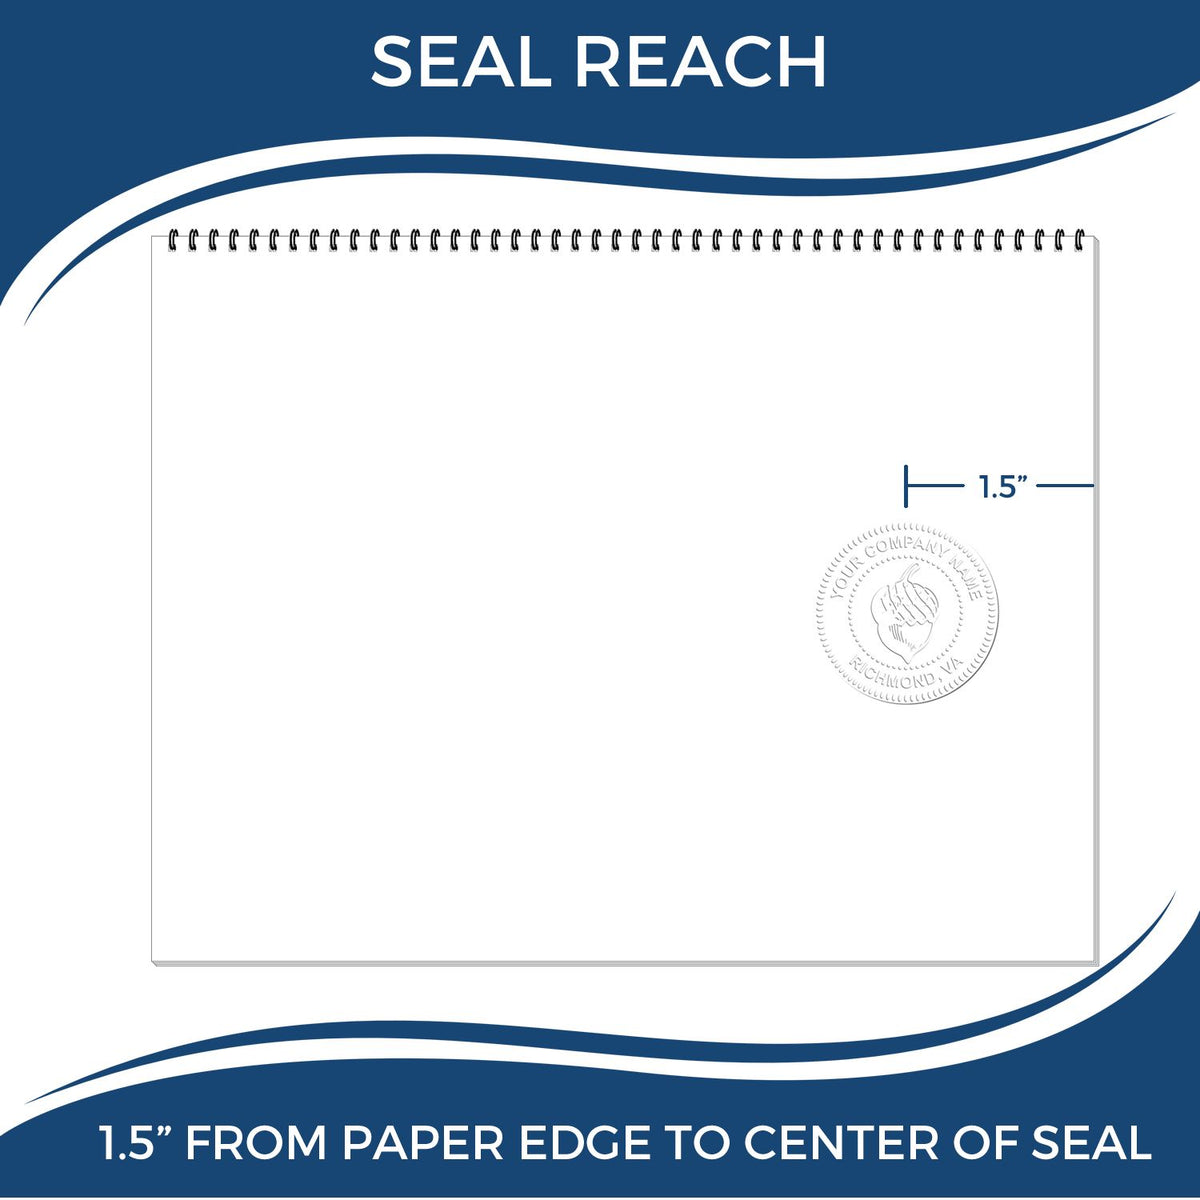 An infographic showing the seal reach which is represented by a ruler and a miniature seal image of the Soft Florida Professional Engineer Seal